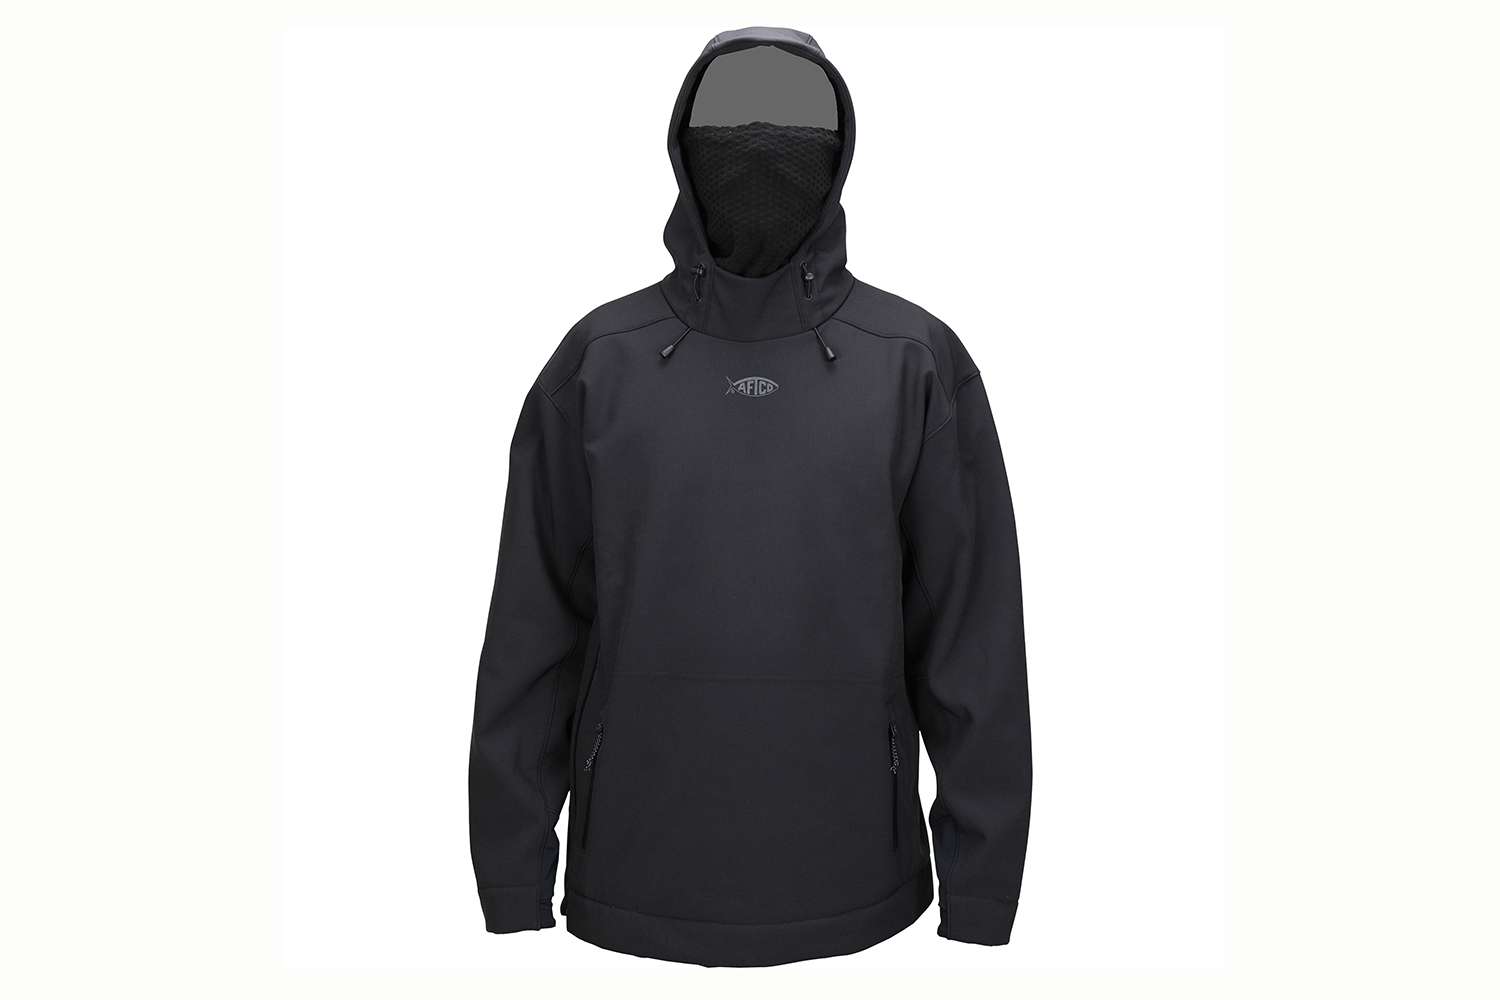 <p><b>AFTCO Reaper Hoodie</b></p>
<p>The AFTCO Reaper hoodie swept the industry by providing a new staple for cold weather comfort leaving traditional hoodies obsolete. Meet the new Reaper Soft Shell adding the next layer to the Reaper family of cold weather gear. Reaper Soft Shell still has a face mask integrated into the garment but now with AFTCO's Hexatron fleece material that provides a good balance of warmth and breathability. Reaper Soft Shell is built with a durable 94% polyester and 6% spandex ripstop stretch softshell material. Also Included is laser-cut ventilation in the underarms for breathability as well as a zippered side vent. For the angler looking for a soft shell cold weather solution, Reaper Soft Shell will be the versatile piece that checks all the boxes and more.</p>
<p><a href=